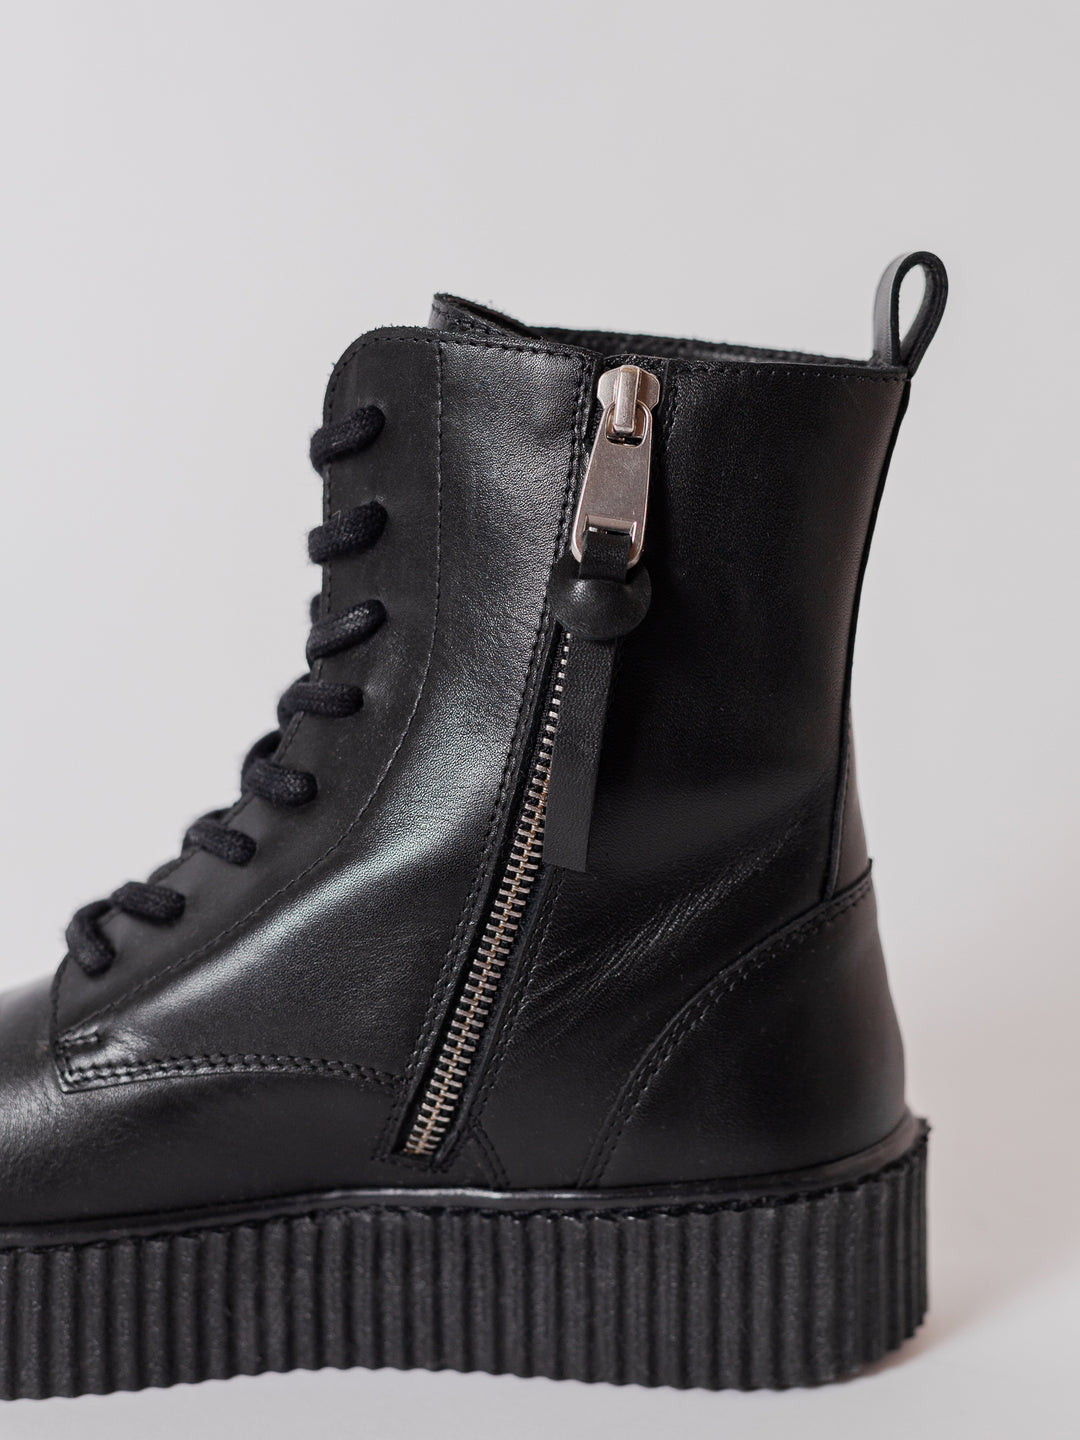 Blankens The Camden Zipper black leather boot sole detailed picture of the zipper